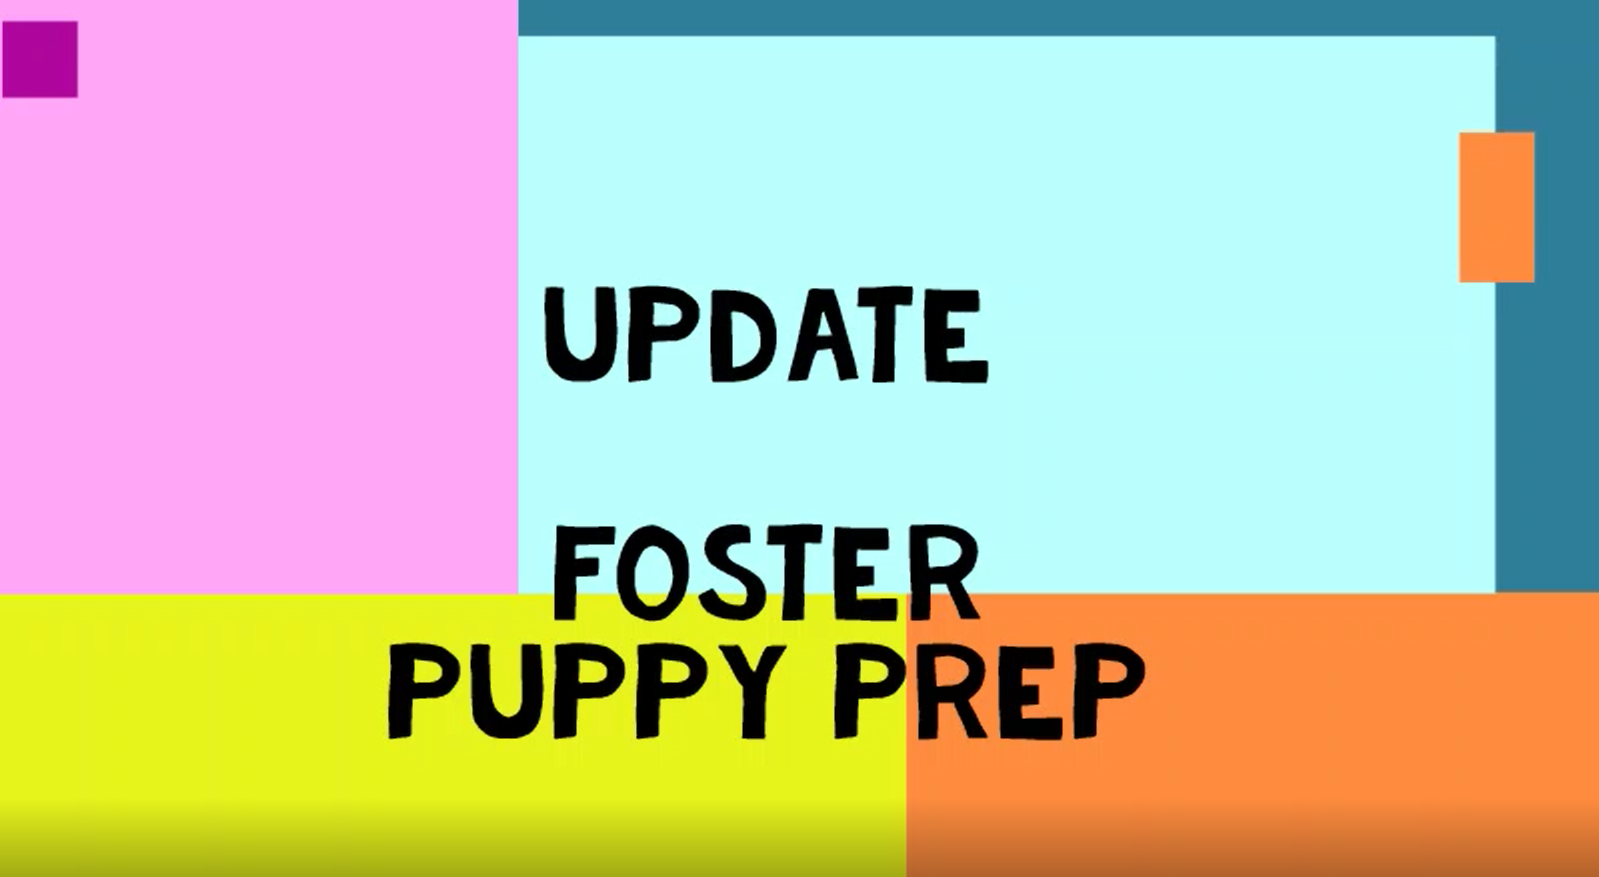 foster puppy example